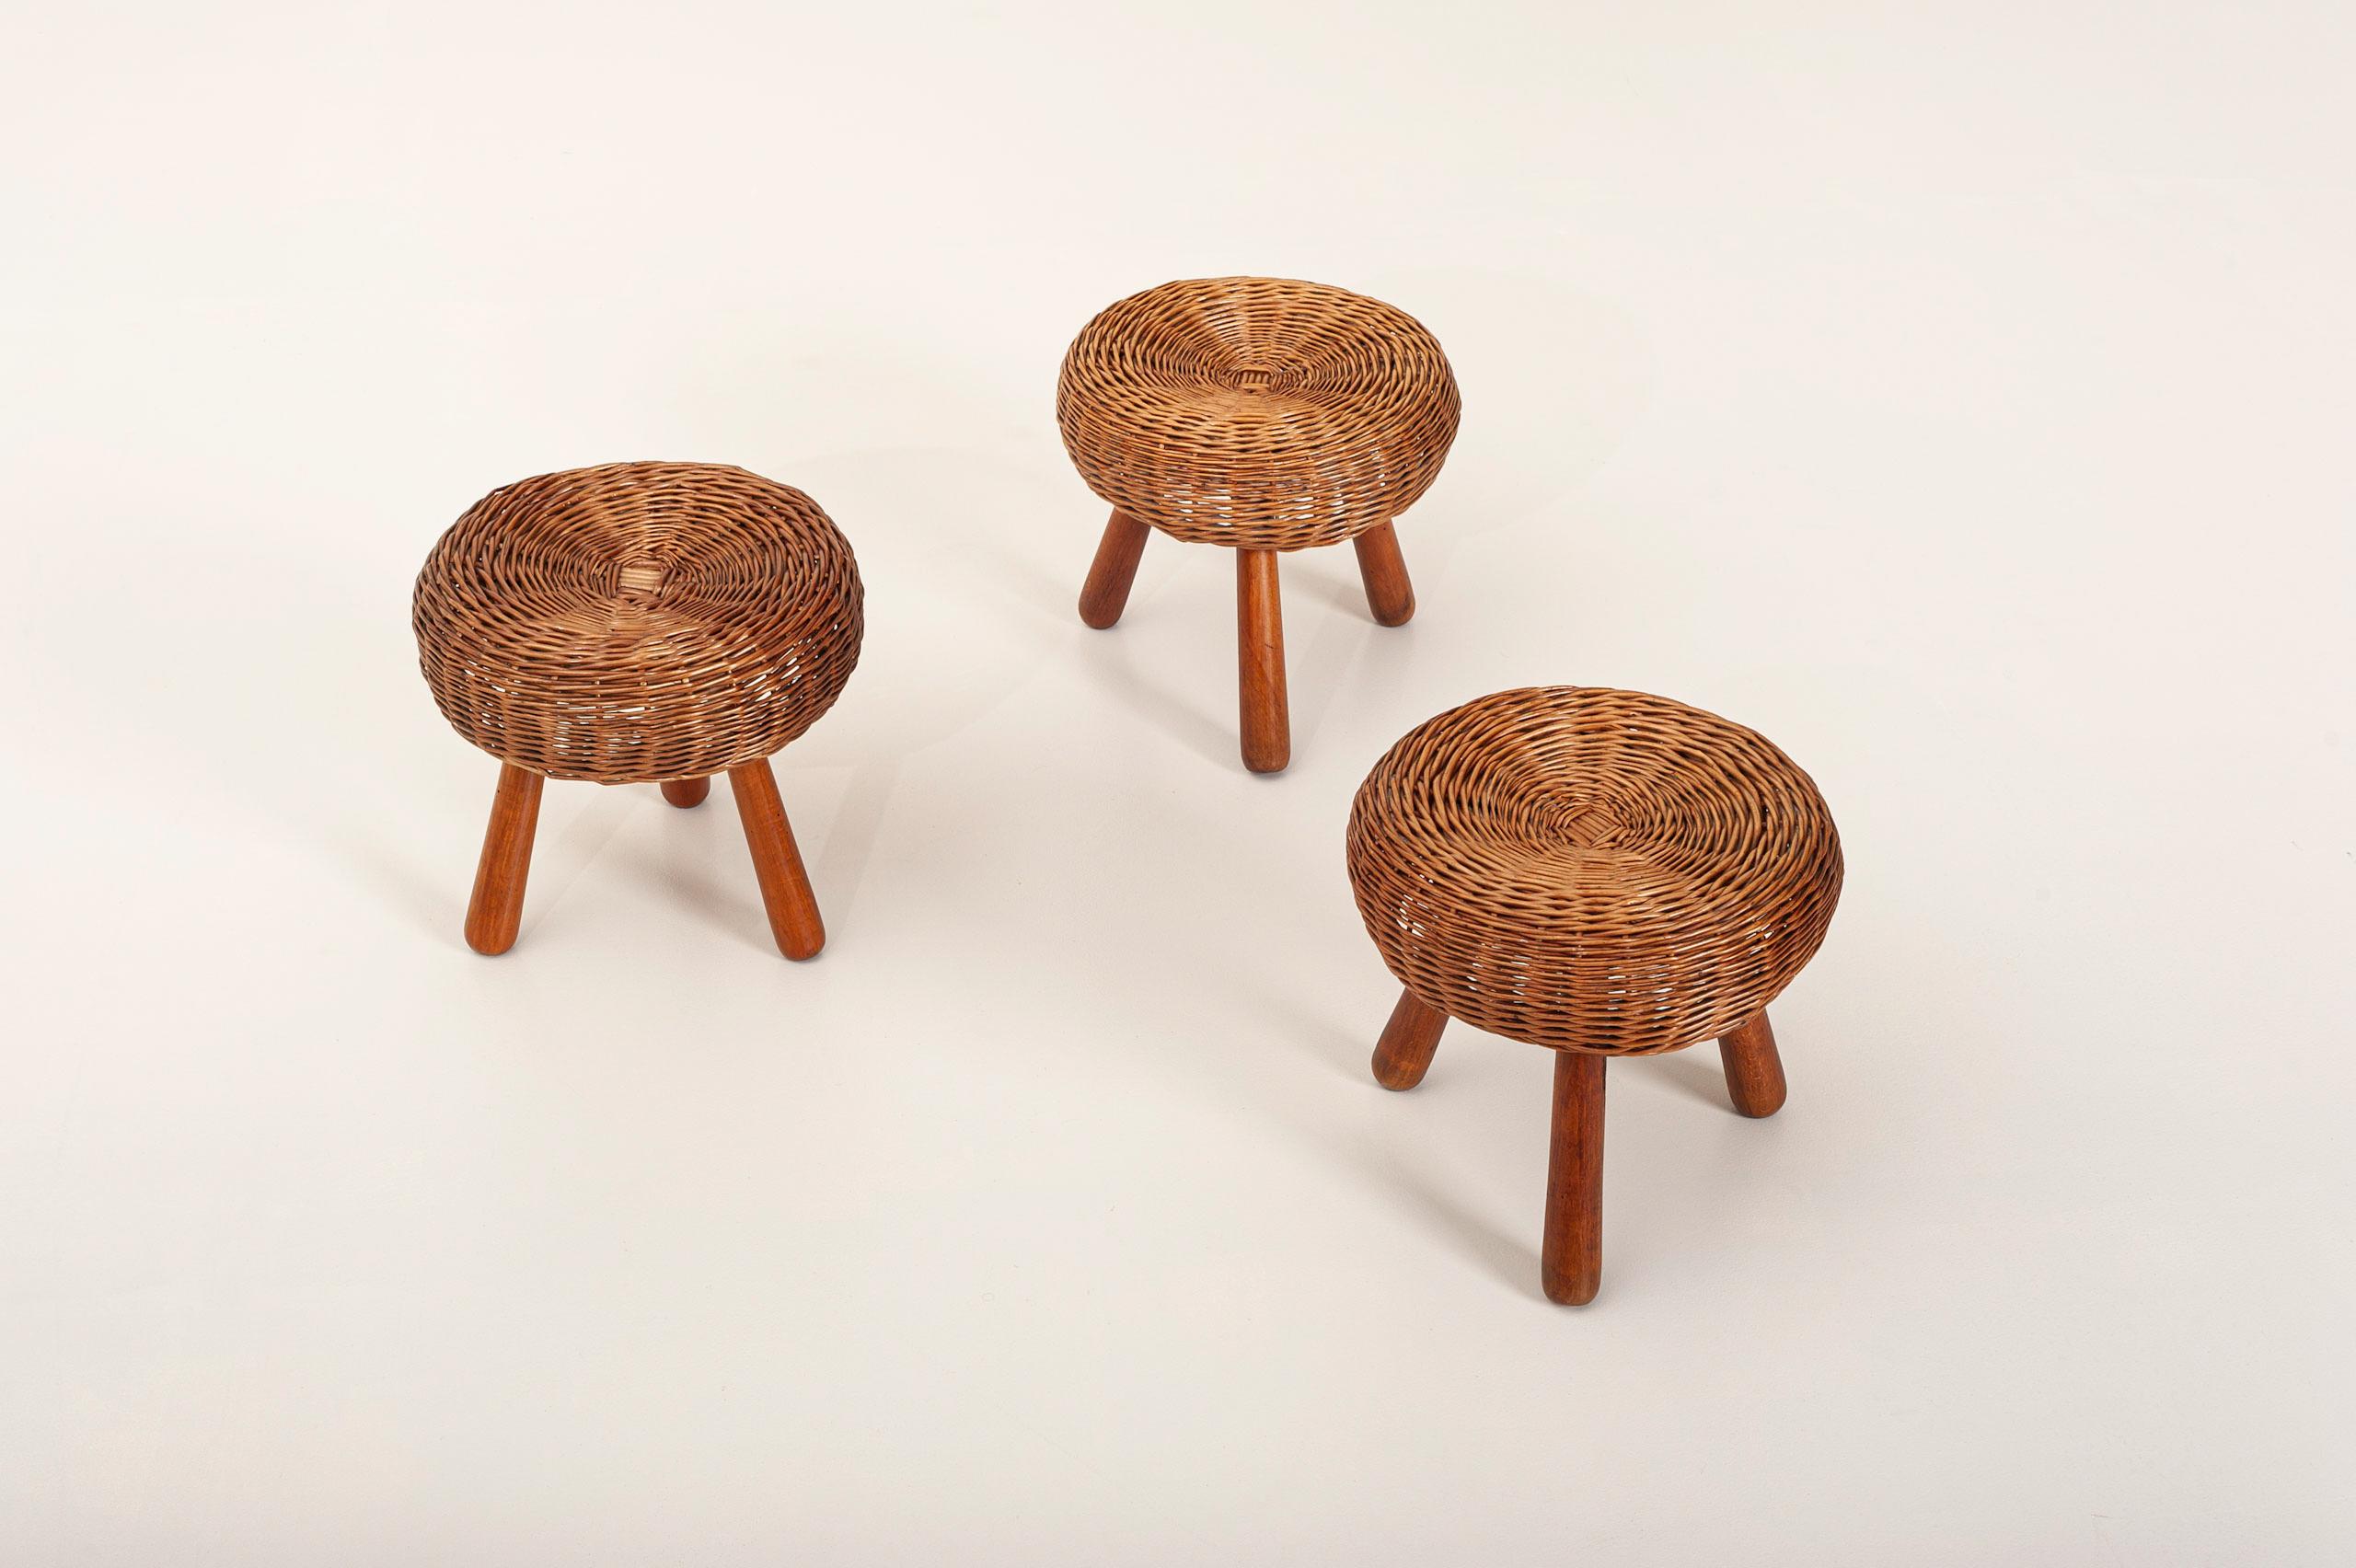 Mid-20th Century Tony Paul Attributed Low Stools, Woven Wicker, Solid Beech, United States, 1950s For Sale